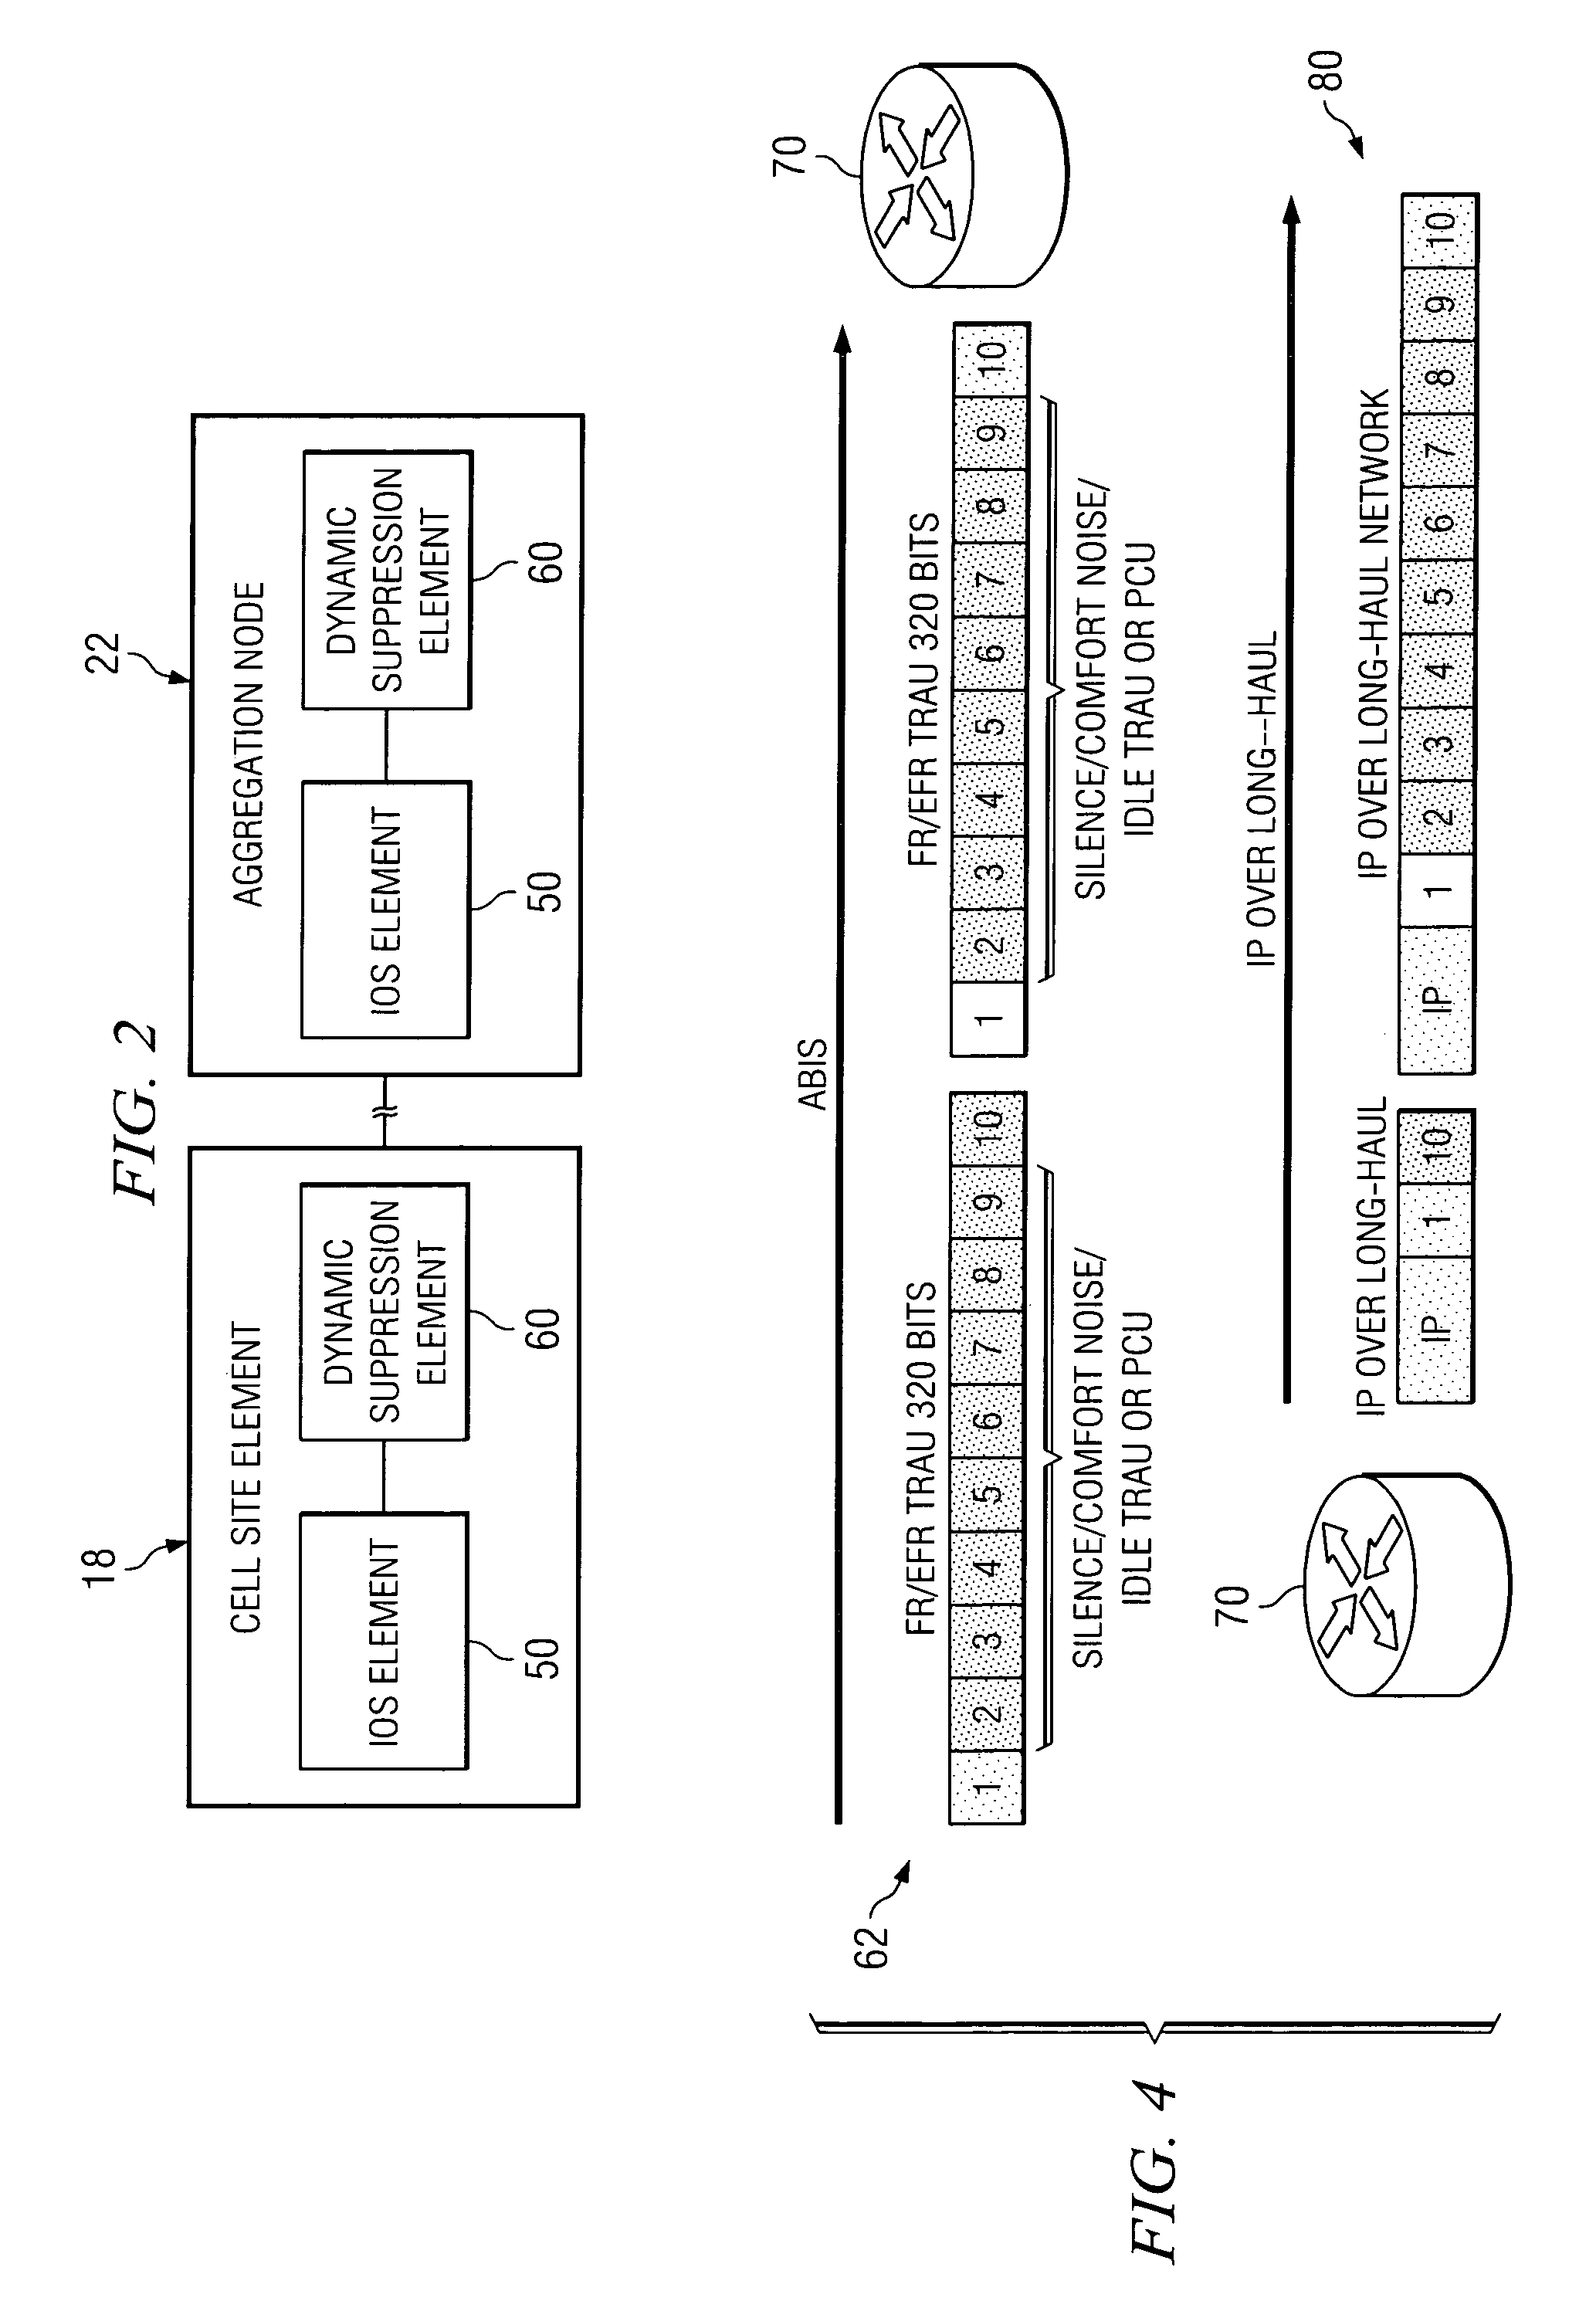 System and method for implementing quality of service in a backhaul communications environment